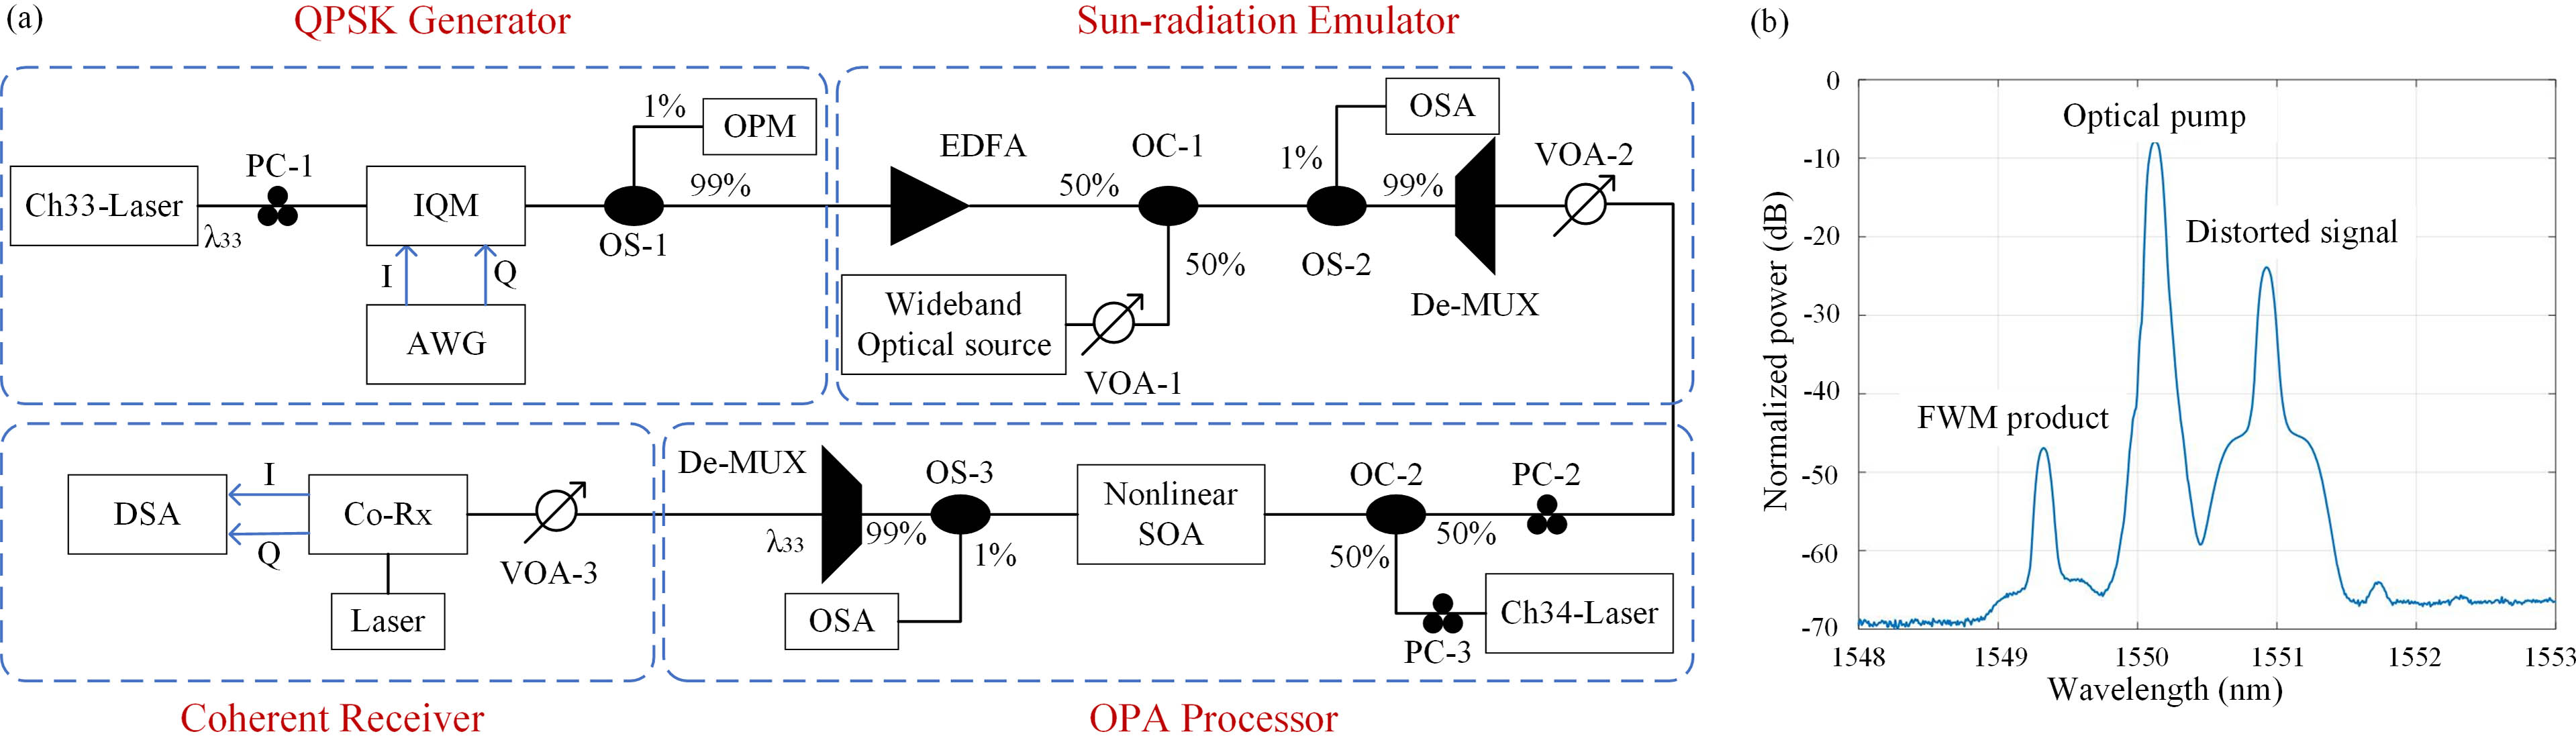 (a) Experimental setup for the OPA processor-based Sun-outage mitigation; (b) optical spectrum obtained from the nonlinear SOA element.